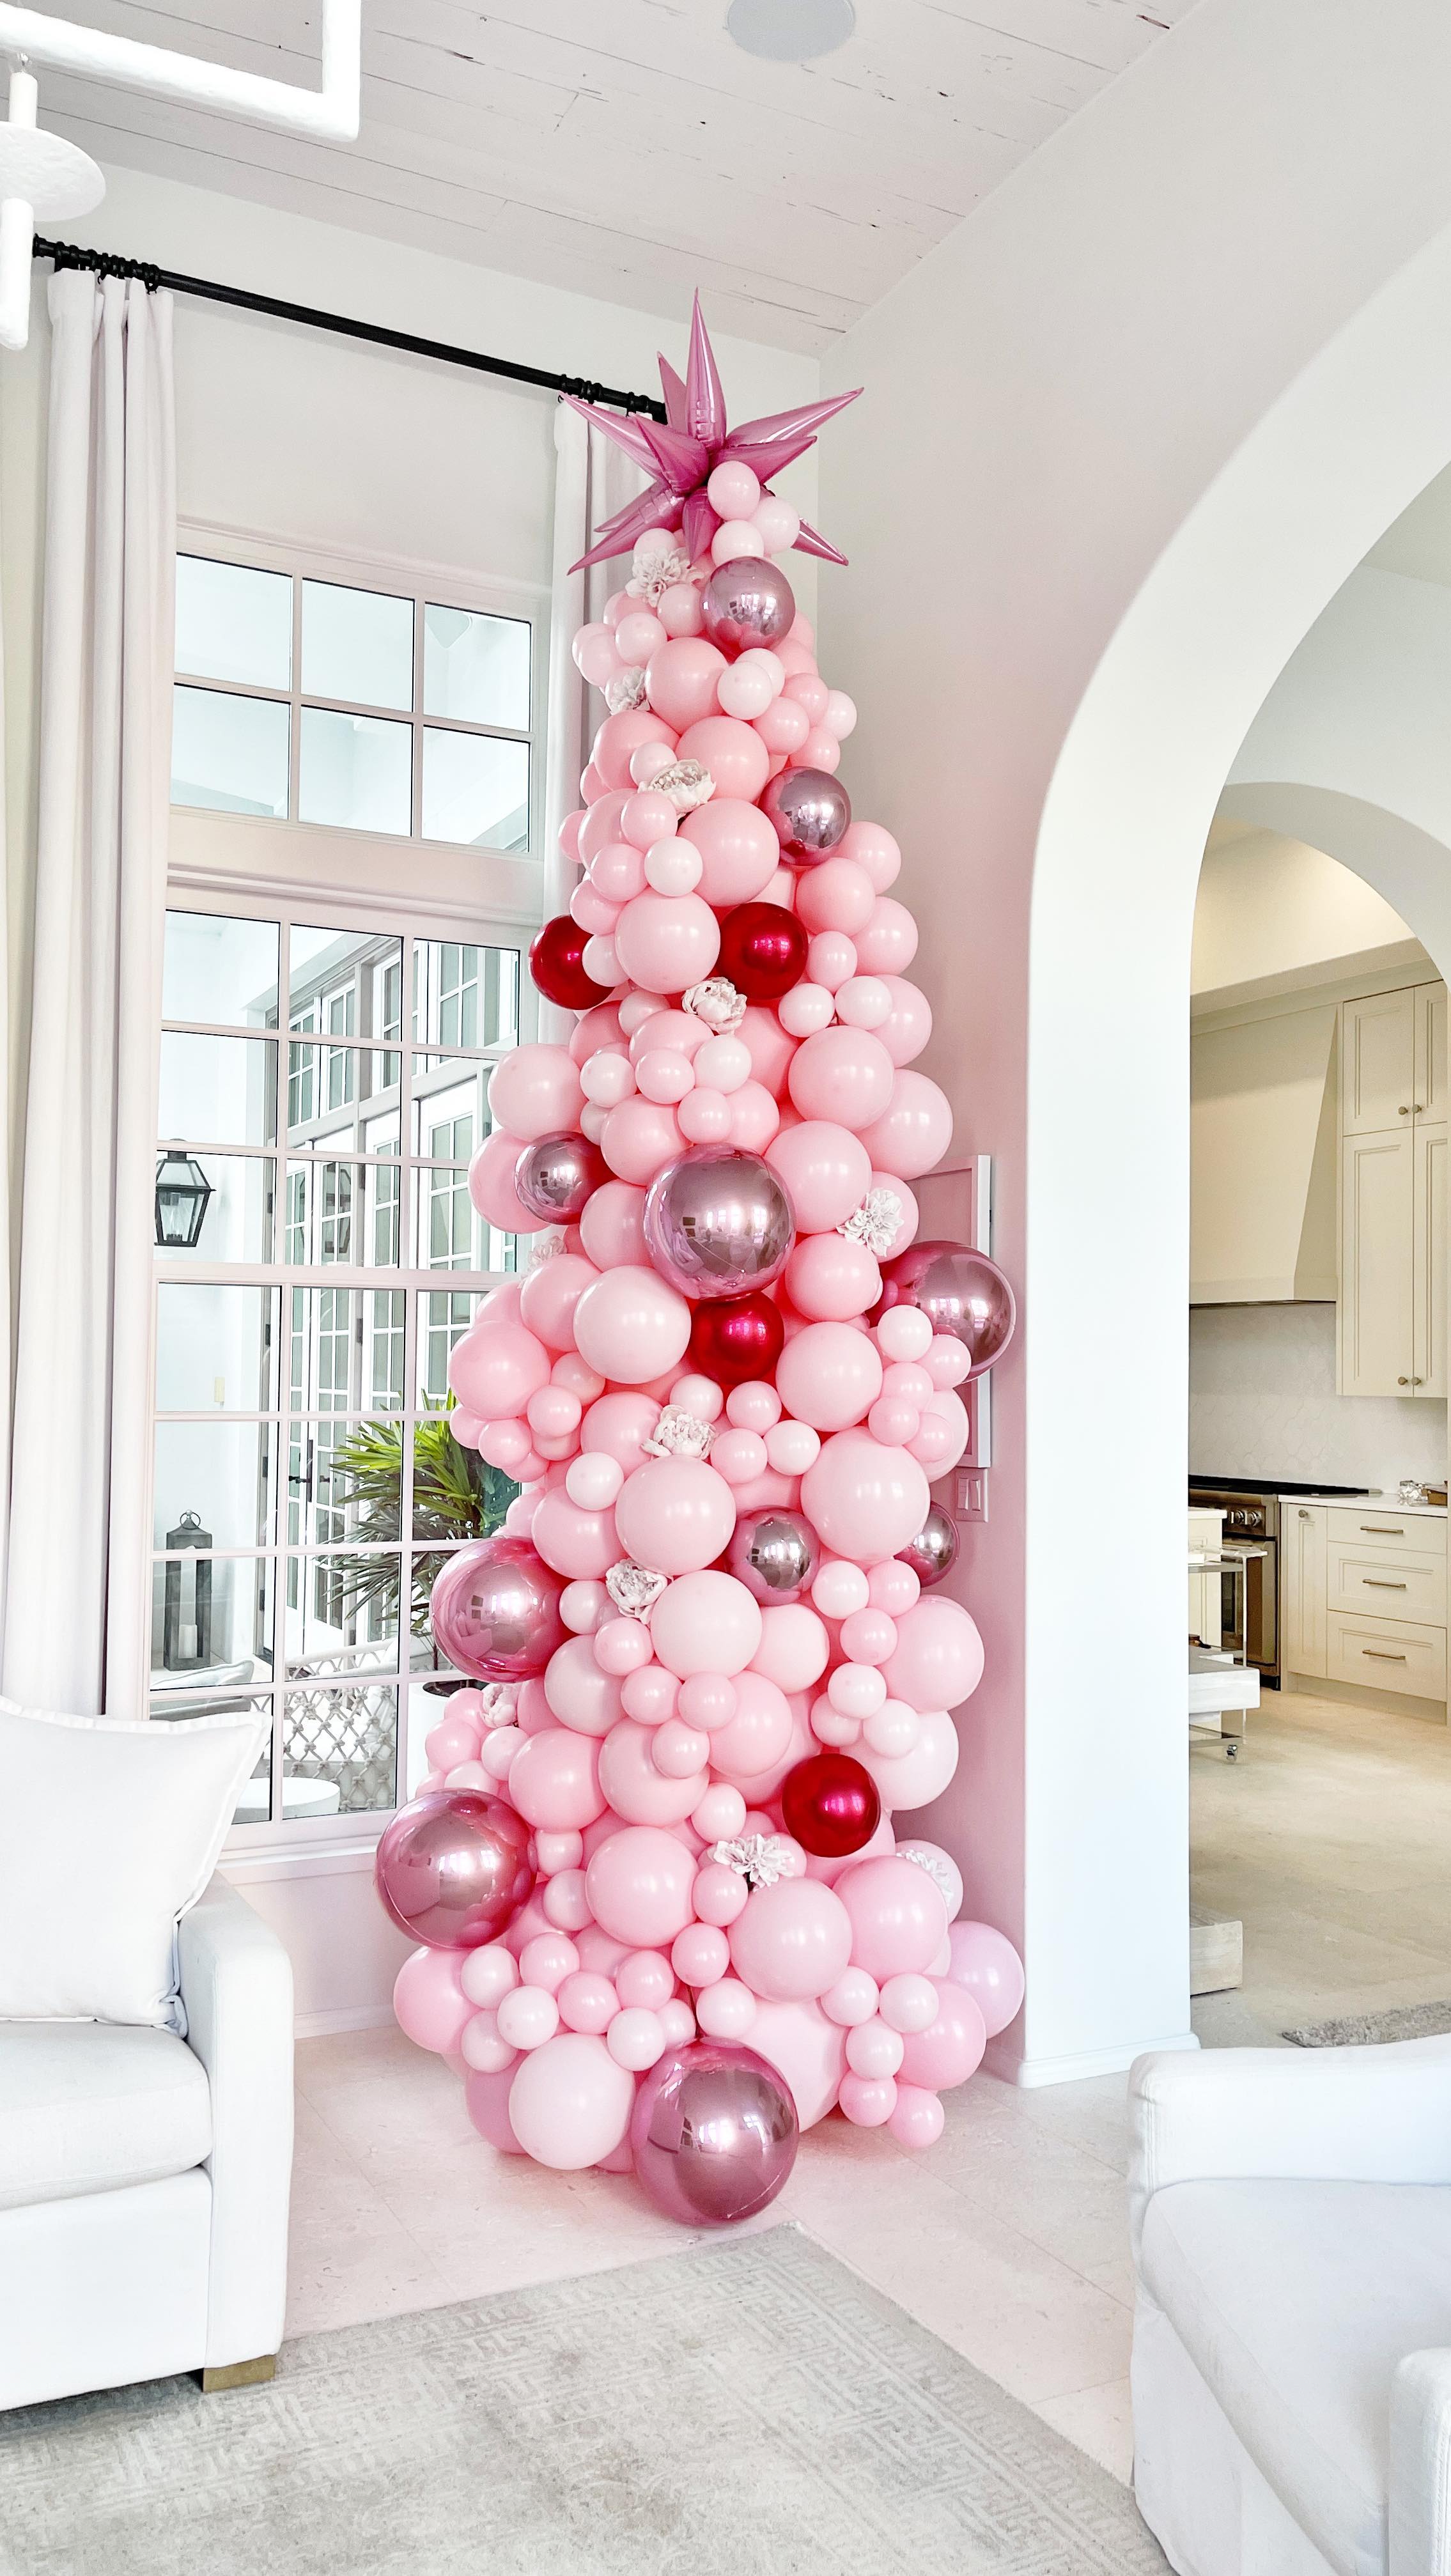 We are all about this PINK balloon Christmas tree for one of our favorite repeat customers!  We 💗 You! 

#alysbeach #alysbeachfl #balloontree #balloonchristmastree #balloonart #balloonstylist #balloondecor #christmastree #pinkchristmastree #pinkchristmas #balloonreel #shortvideo #reel